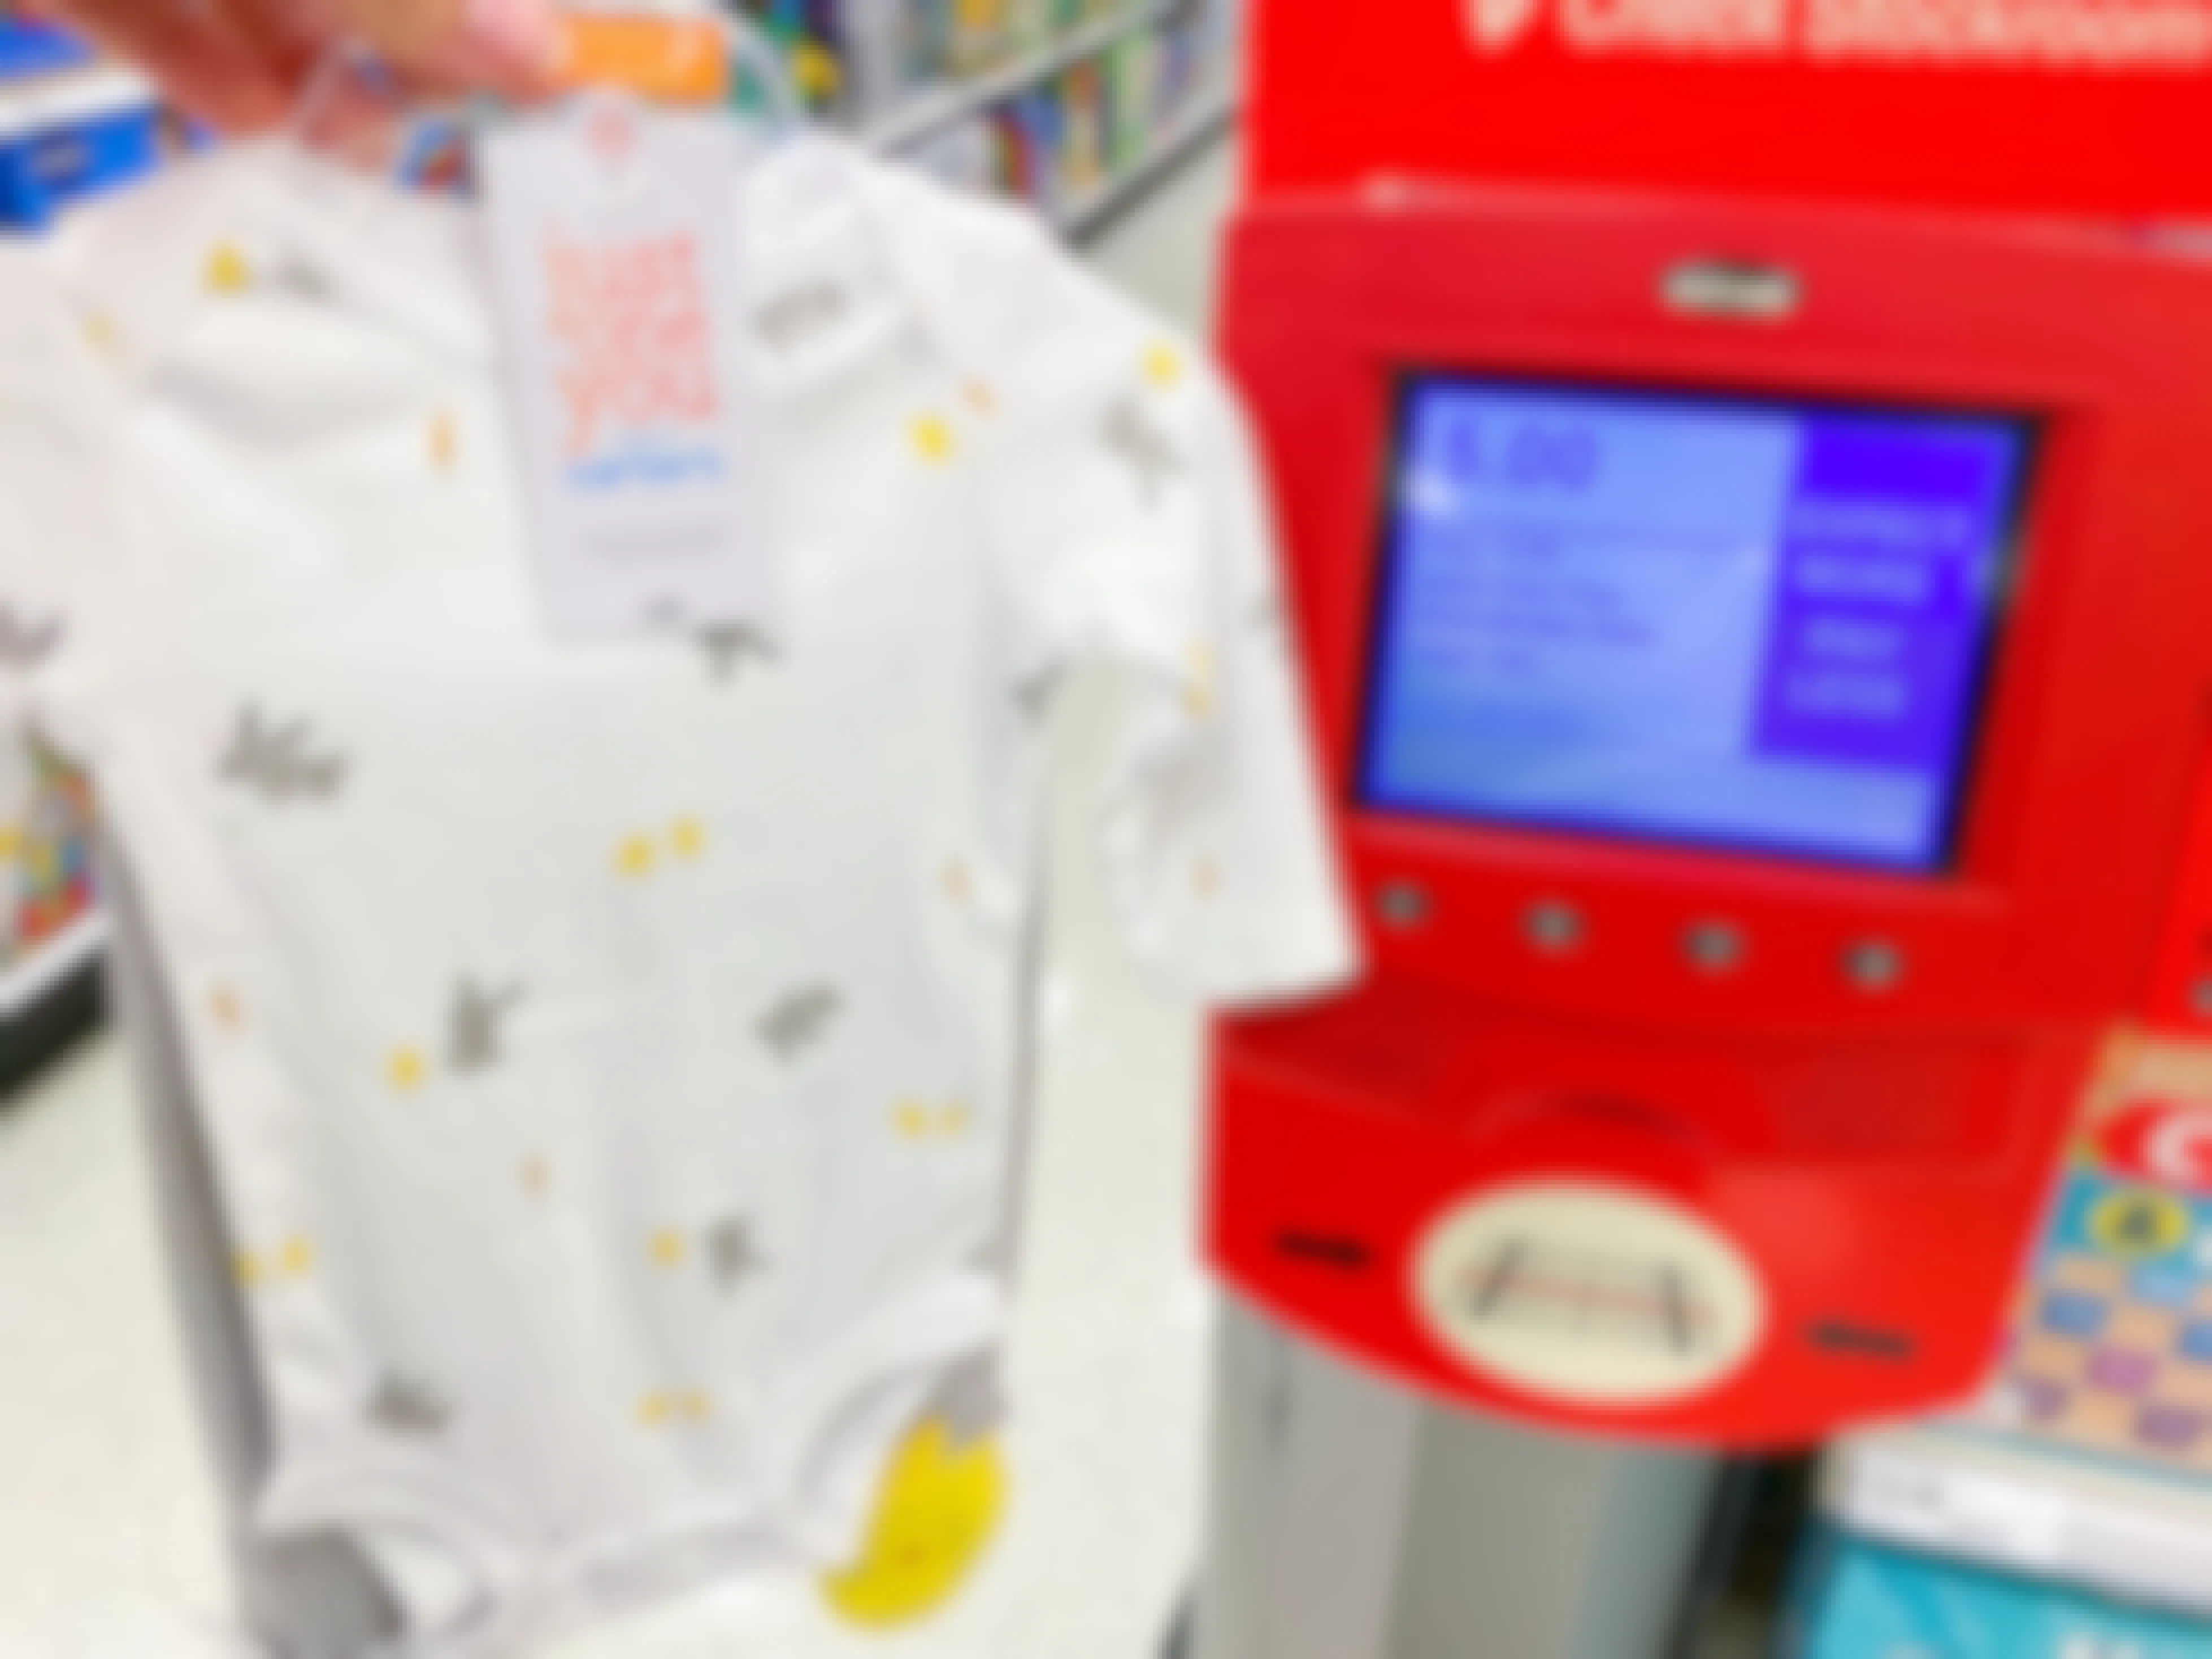 baby clothes being held in front of target scanner showing sales price